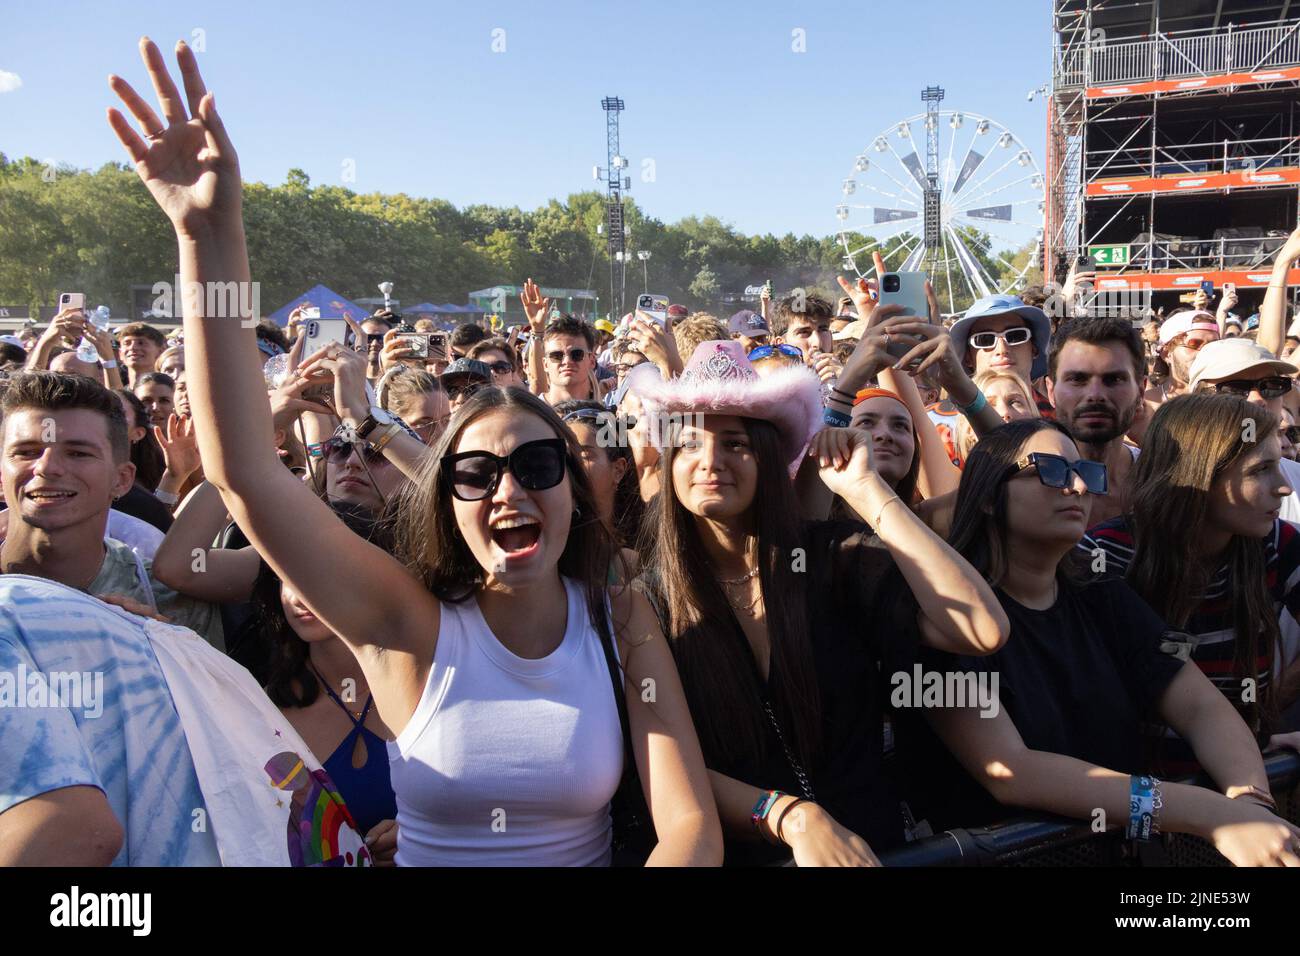 Budapest. 10th Aug, 2022. People enjoy a concert at Sziget Festival in Budapest, Hungary on Aug. 10, 2022. Credit: Attila Volgyi/Xinhua/Alamy Live News Stock Photo